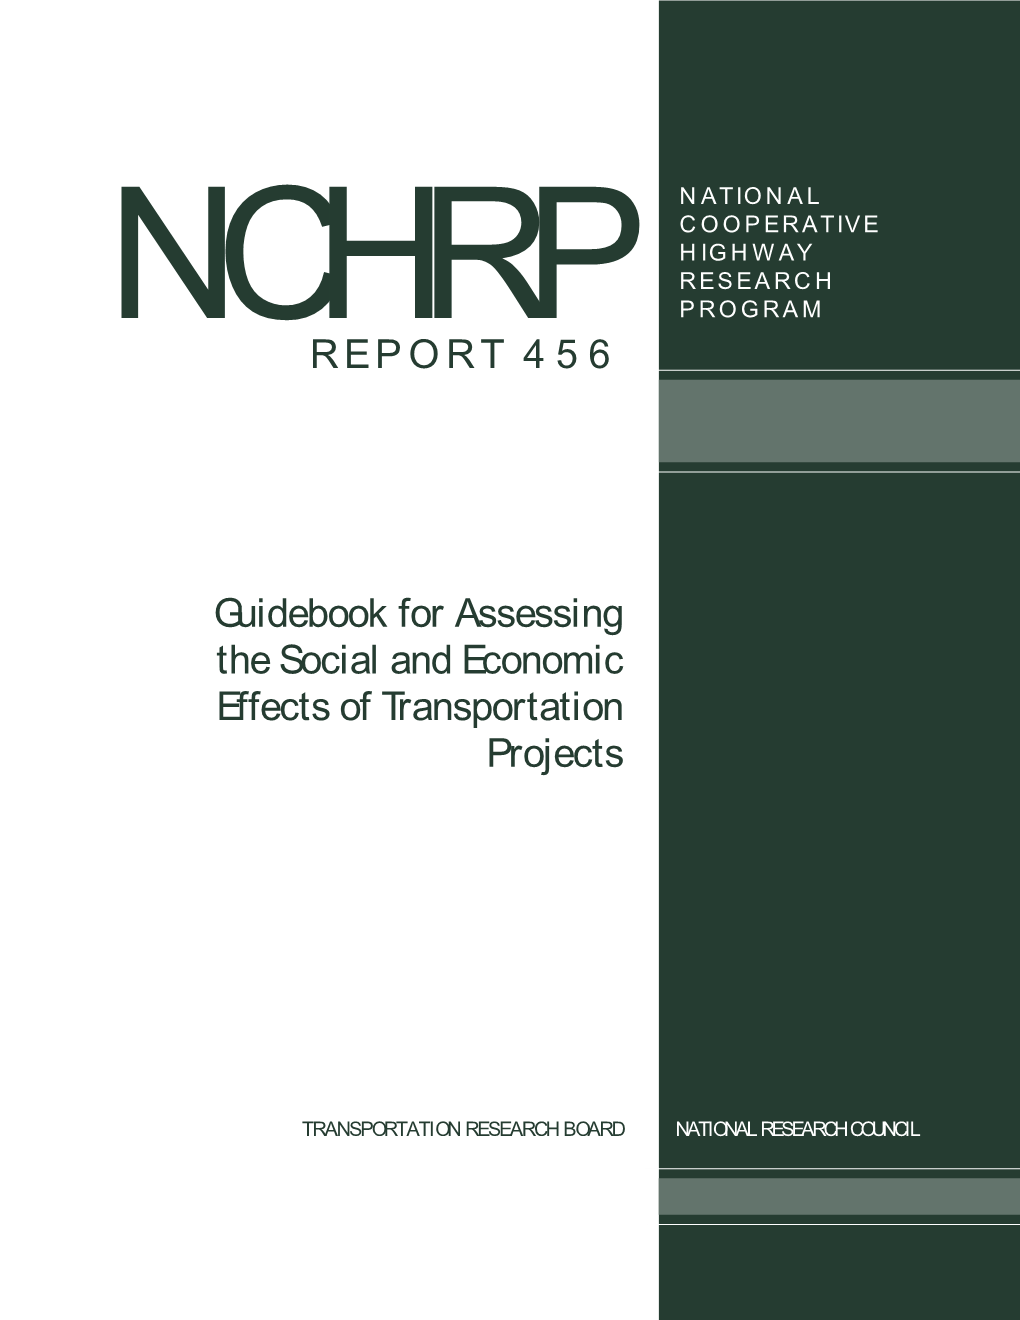 NCHRP 456 Guidebook for Assessing the Social and Economic Effects Of